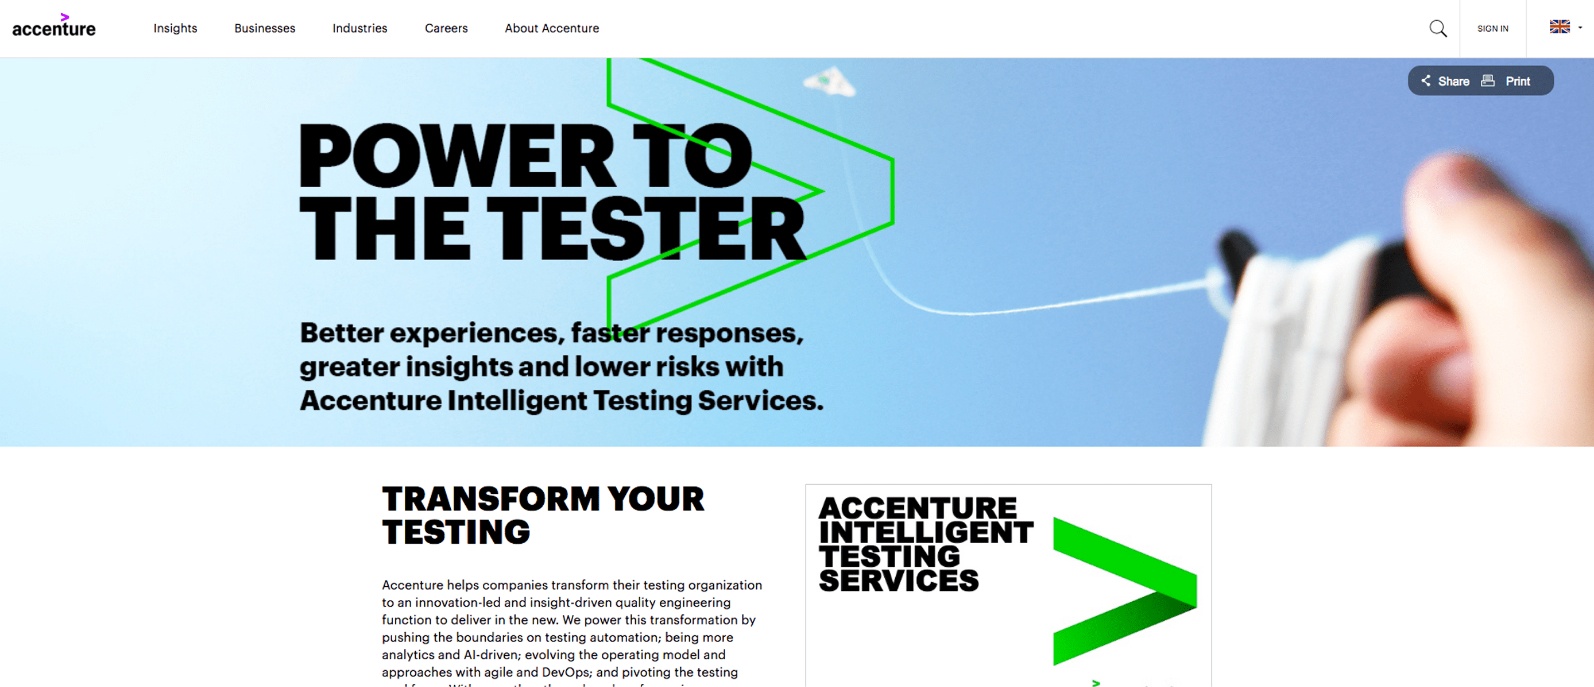 accenture a/b testing tool